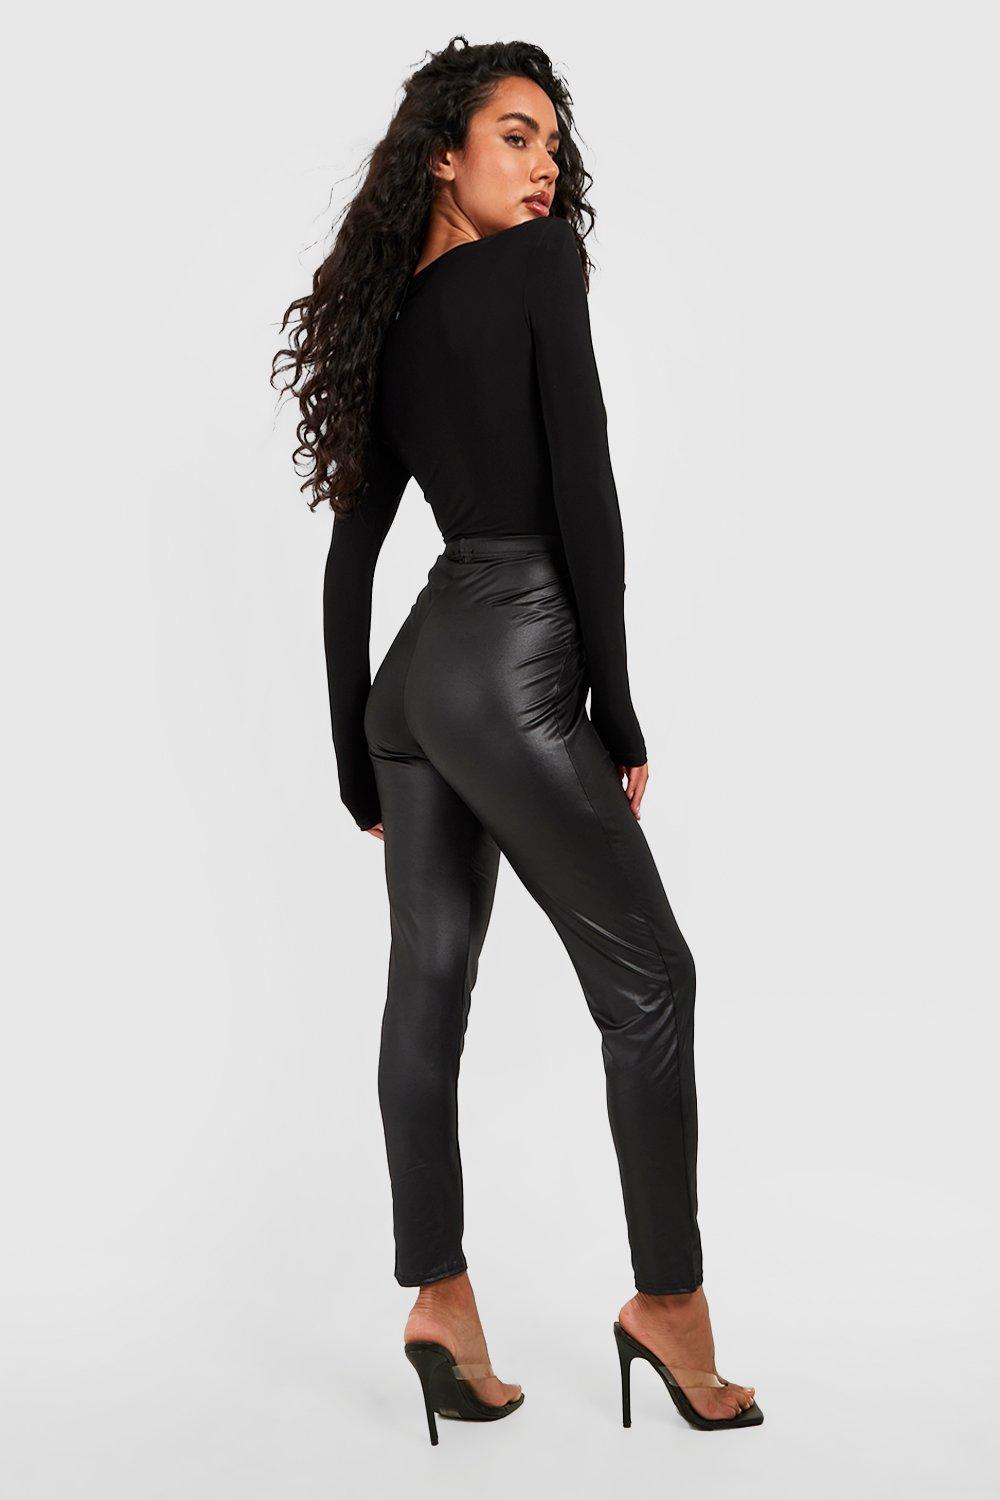 Cutie donning high waisted faux Leather Leggings, Heels and Tattoos